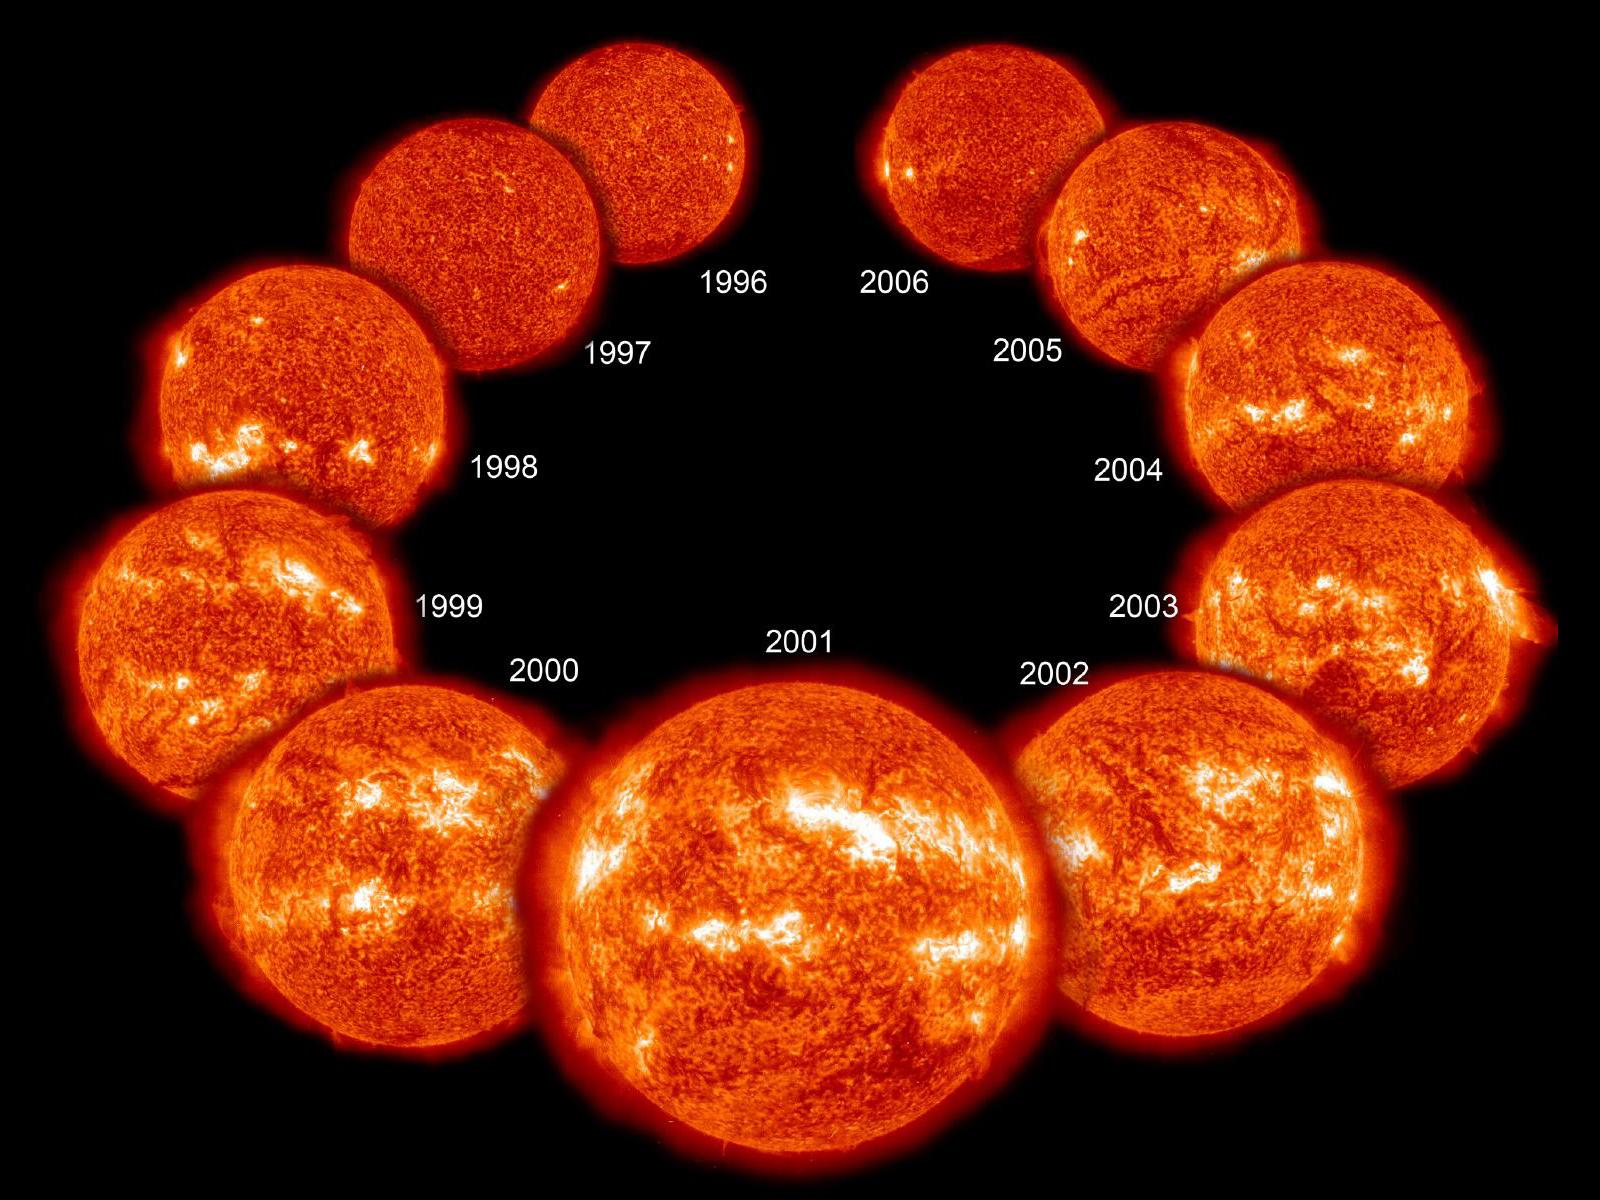 Eleven years in the life of the Sun, spanning most of solar cycle 23, as it progressed from solar minimum (upper left) to maximum conditions and back to minimum (upper right) again, seen as a collage of ten full-disk images of the lower corona.